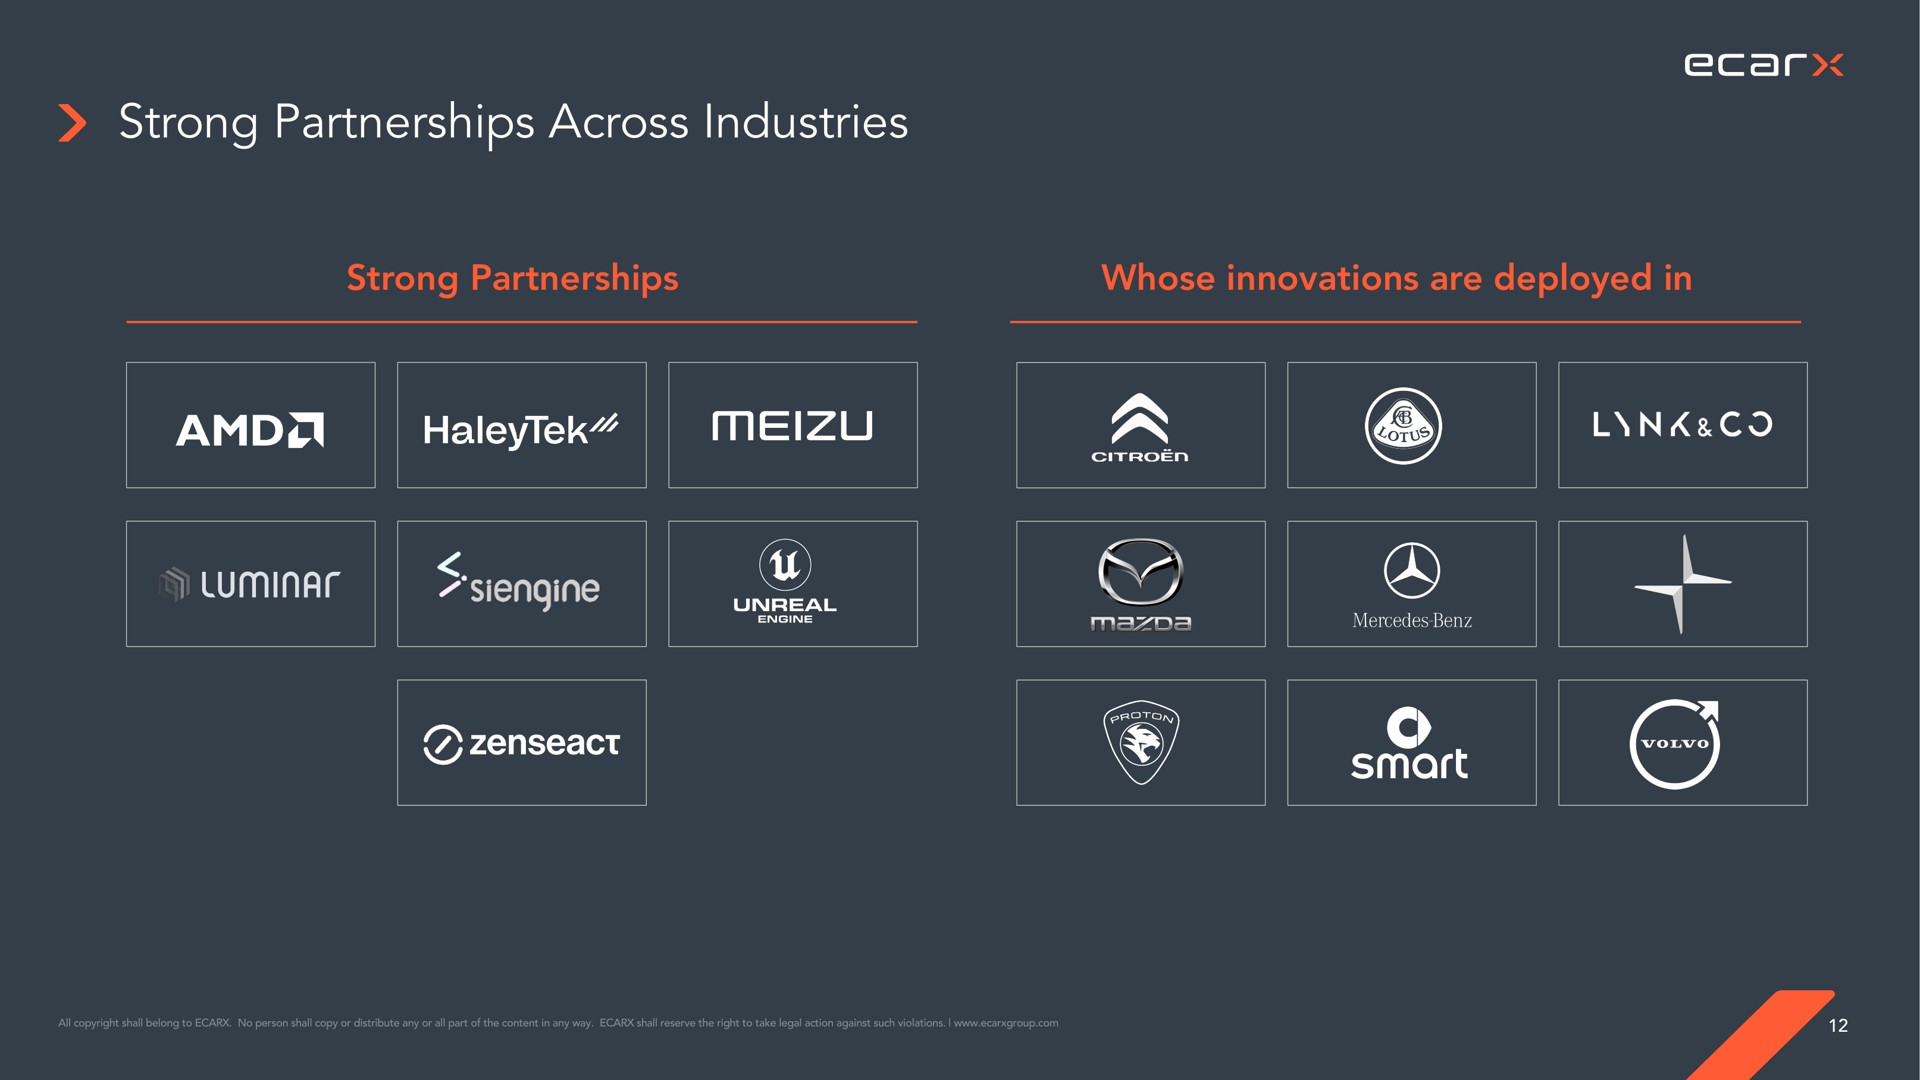 strong partnerships across industries strong partnerships whose innovations are deployed in a smart | Ecarx